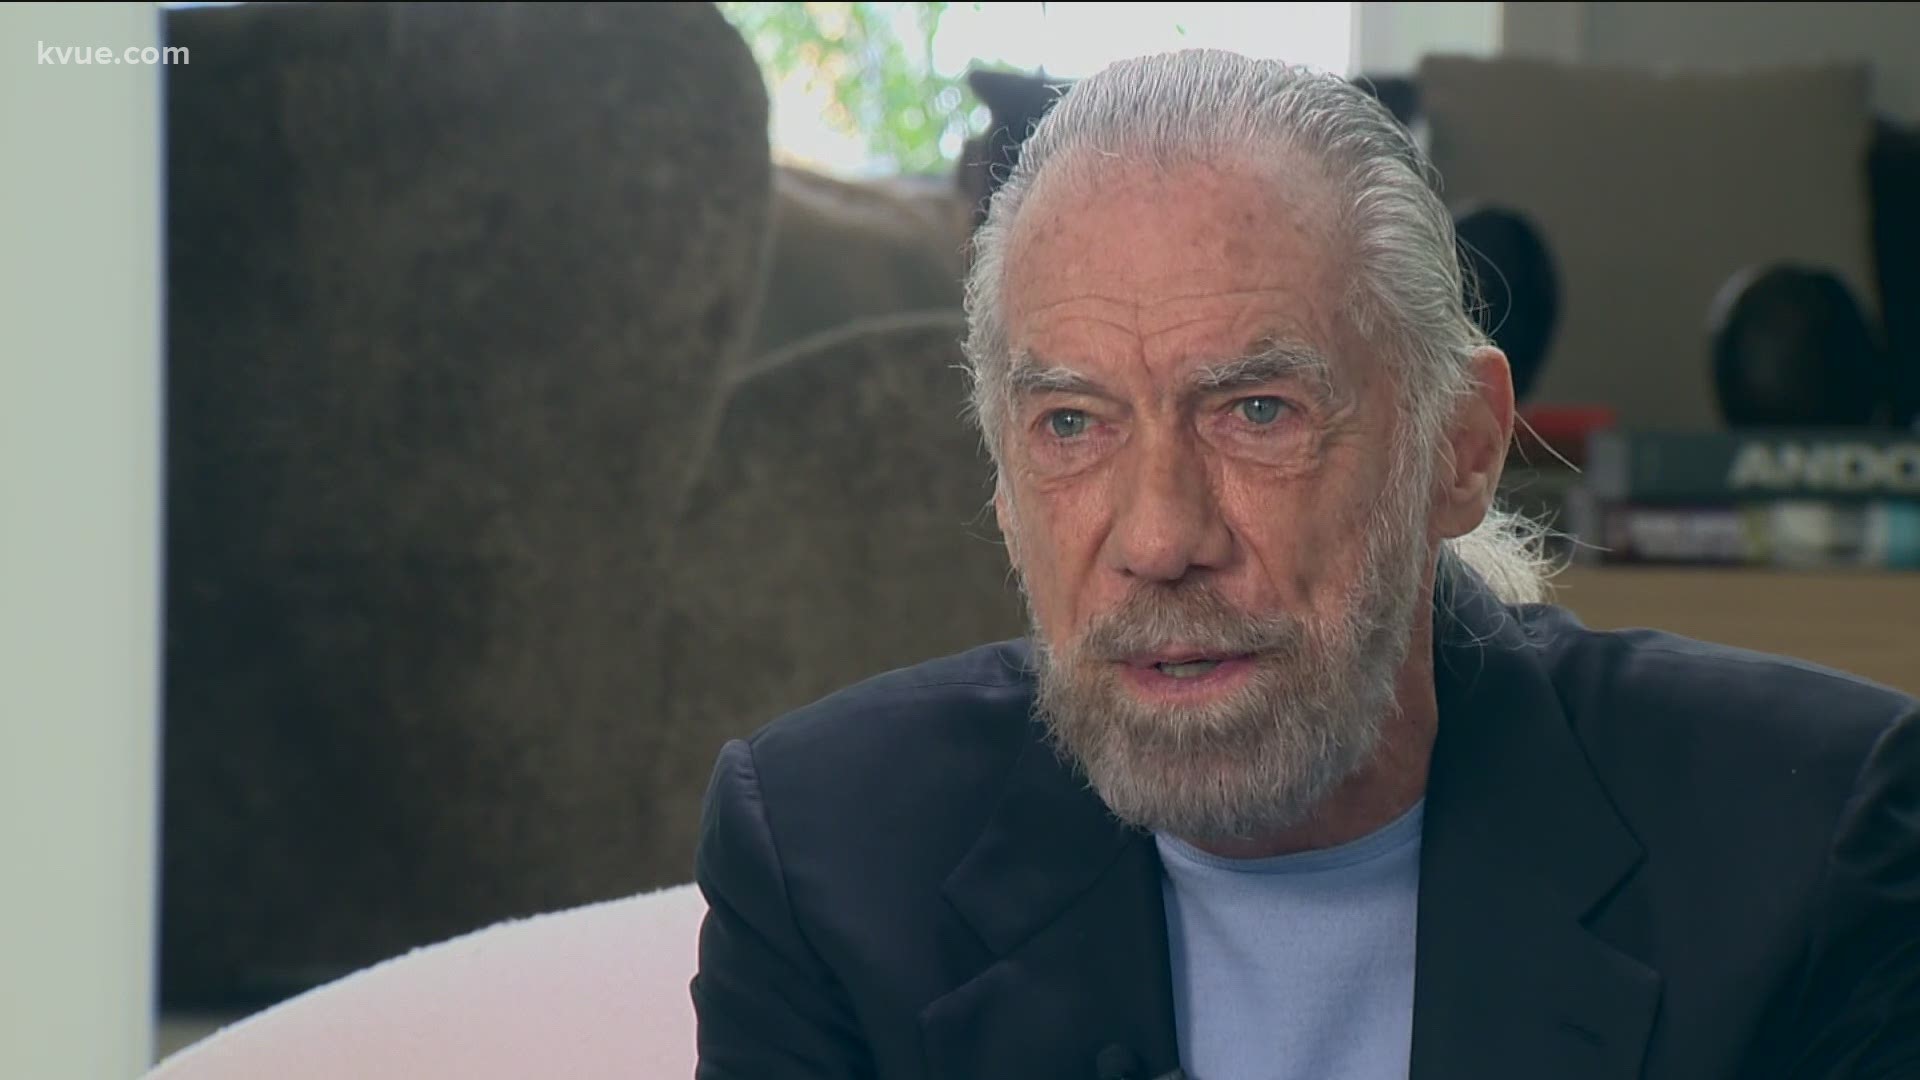 As Austin begins to clean up homeless camps, one big-name entrepreneur is lending a hand. John Paul DeJoria has a reason for wanting to give back.